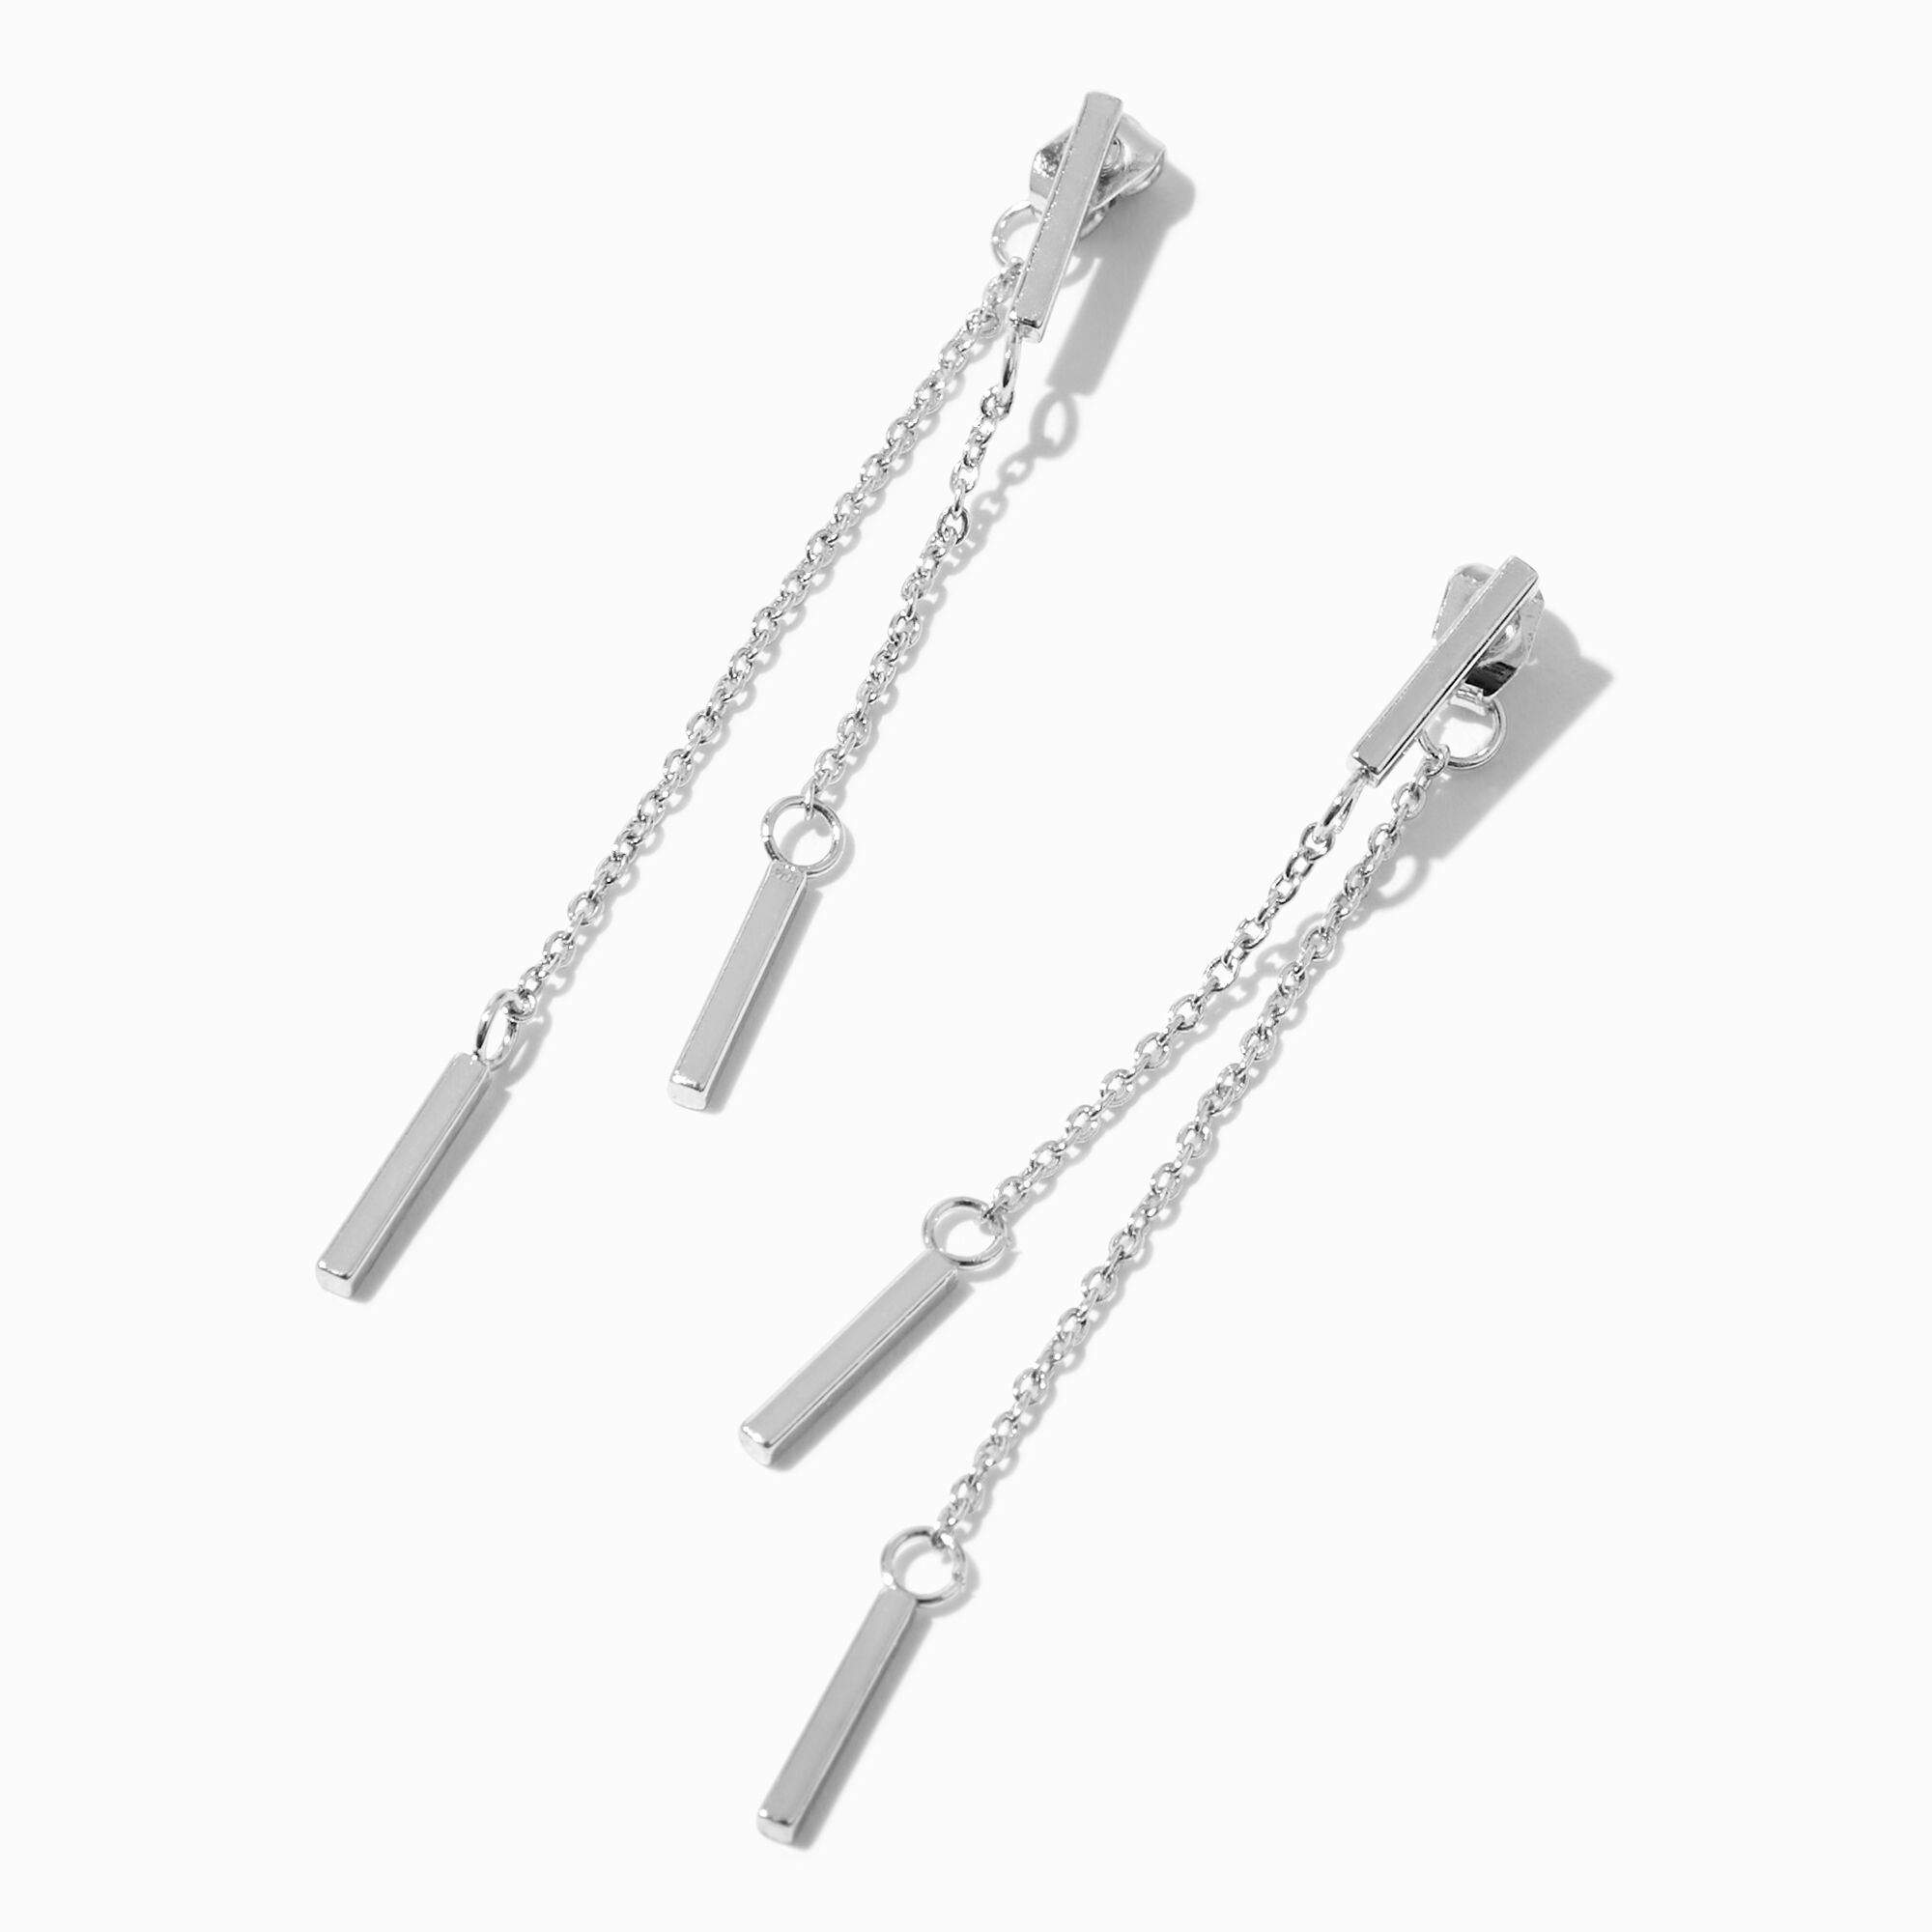 View Claires Tone 2 Double Bar Front Back Drop Earrings Silver information